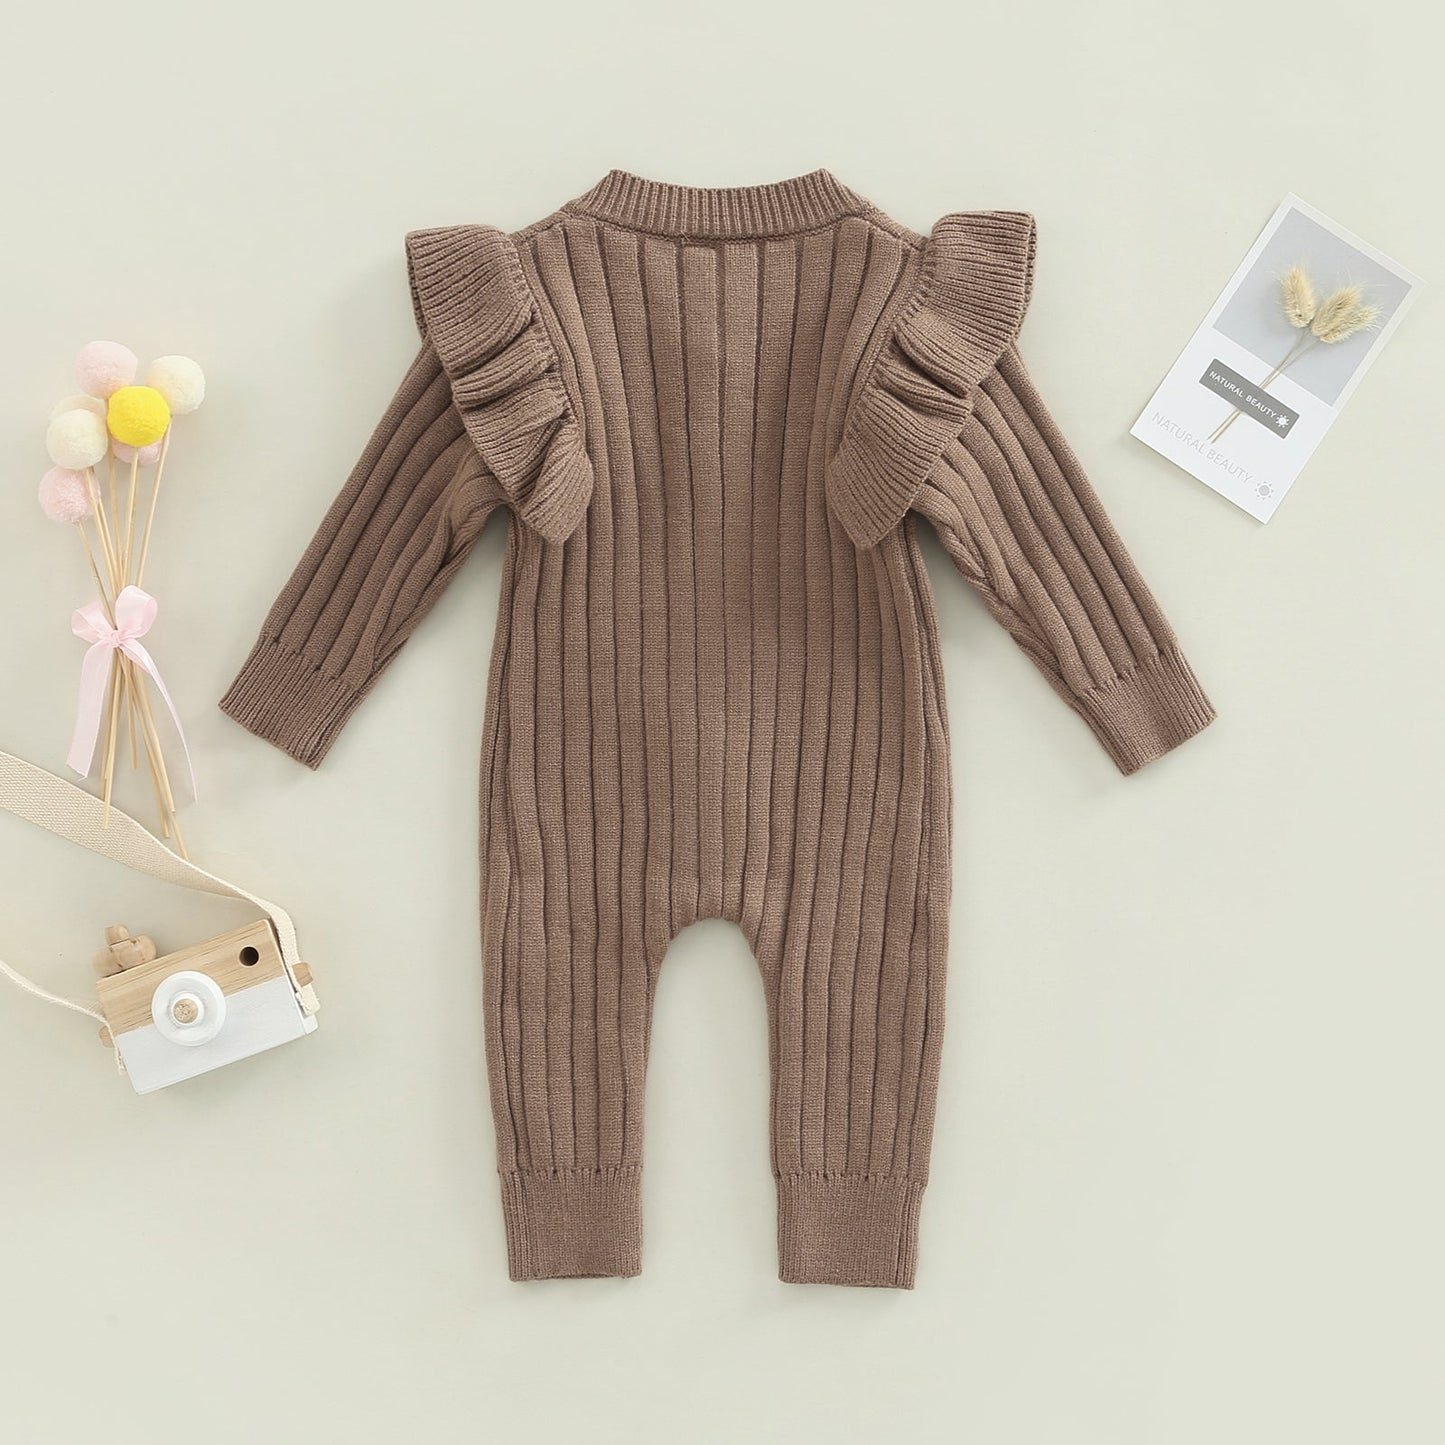 Baby Girls Toddler Fall Winter Chocolate Knit Ruffle Romper Jumpsuit